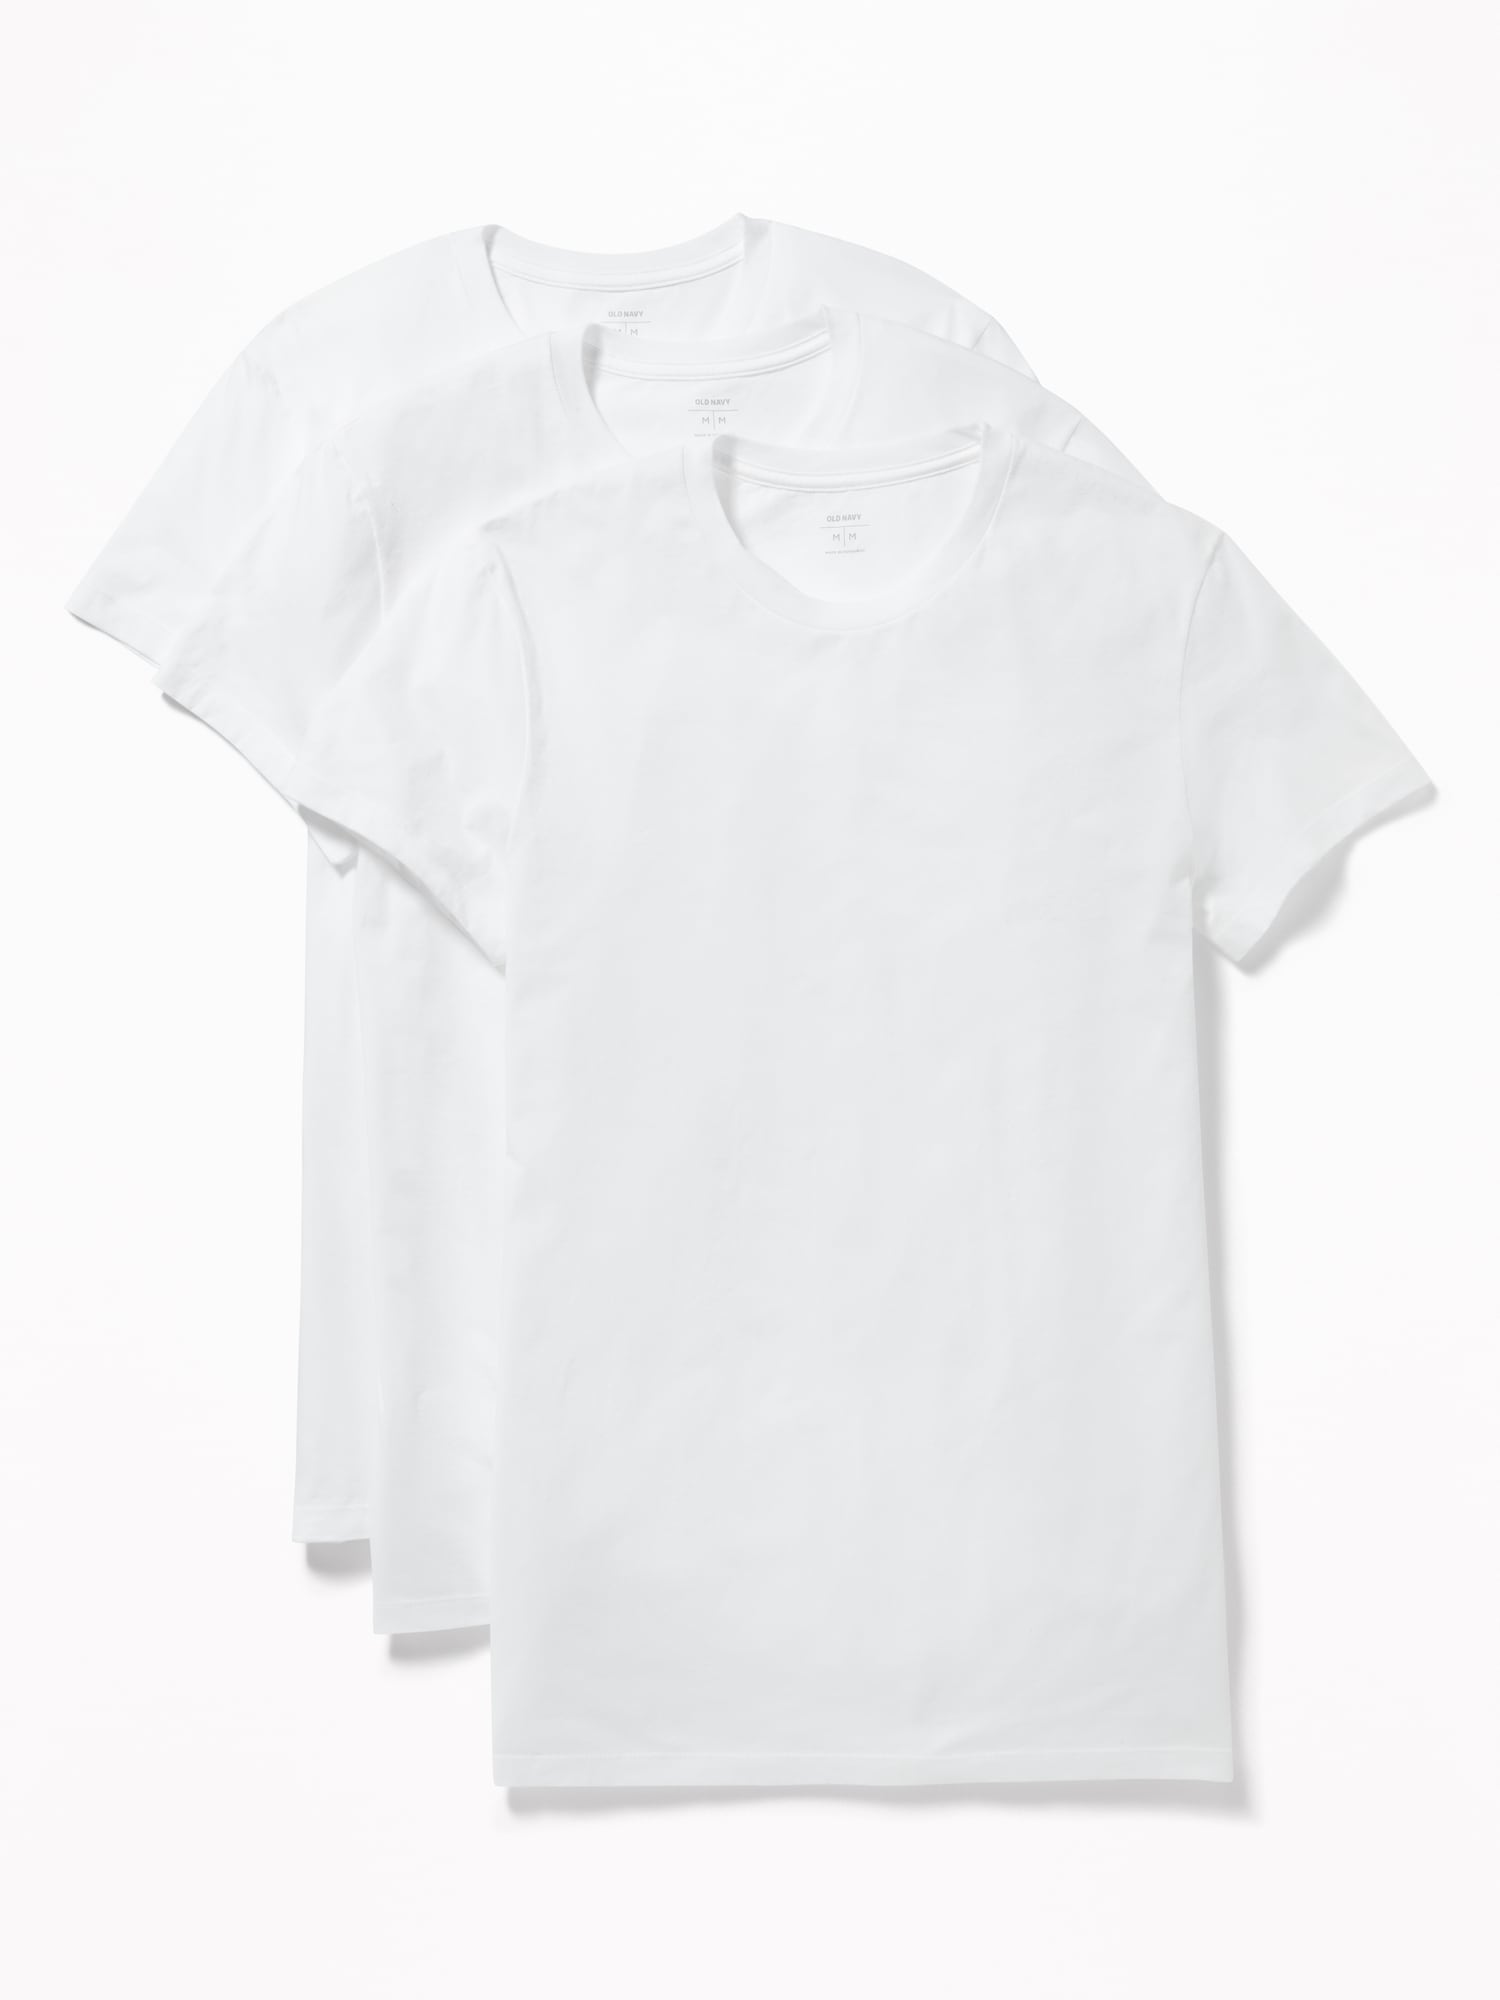 Go-Dry Crew-Neck T-Shirts 3-Pack | Old Navy